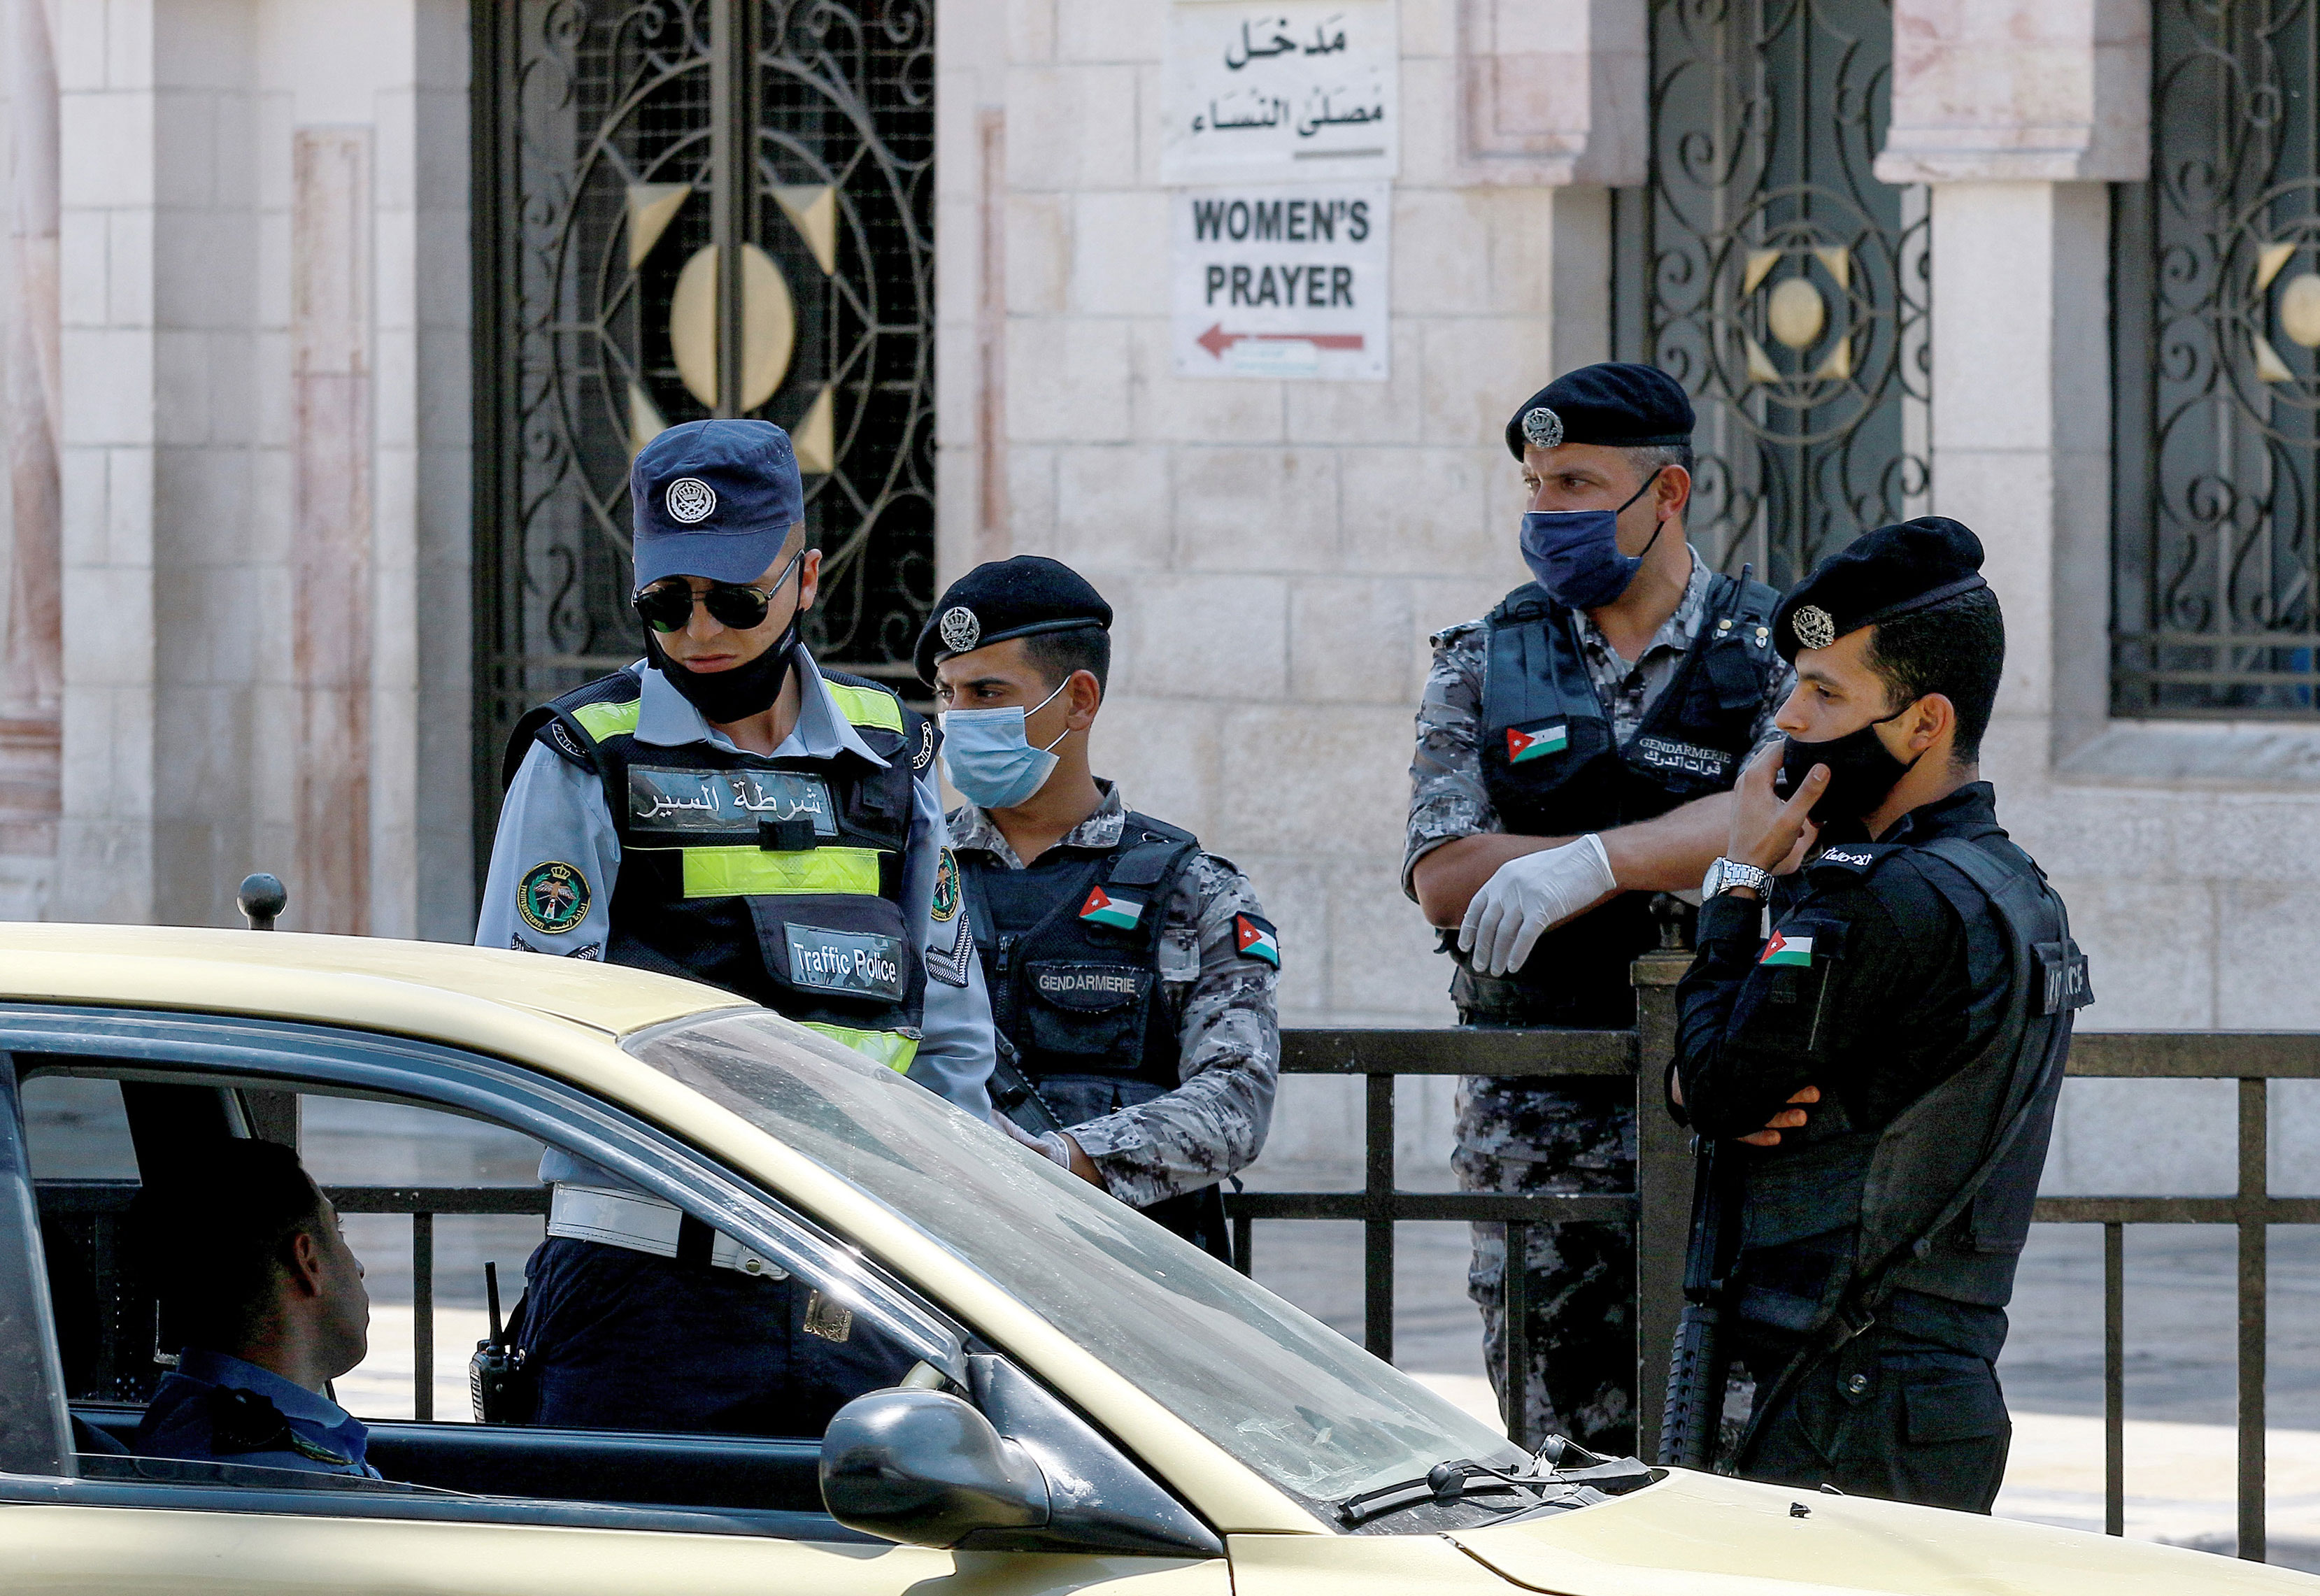 Police officers stop a vehicle outside the Grand Husseini Mosque in Amman, Jordan, while enforcing a curfew on August 28.